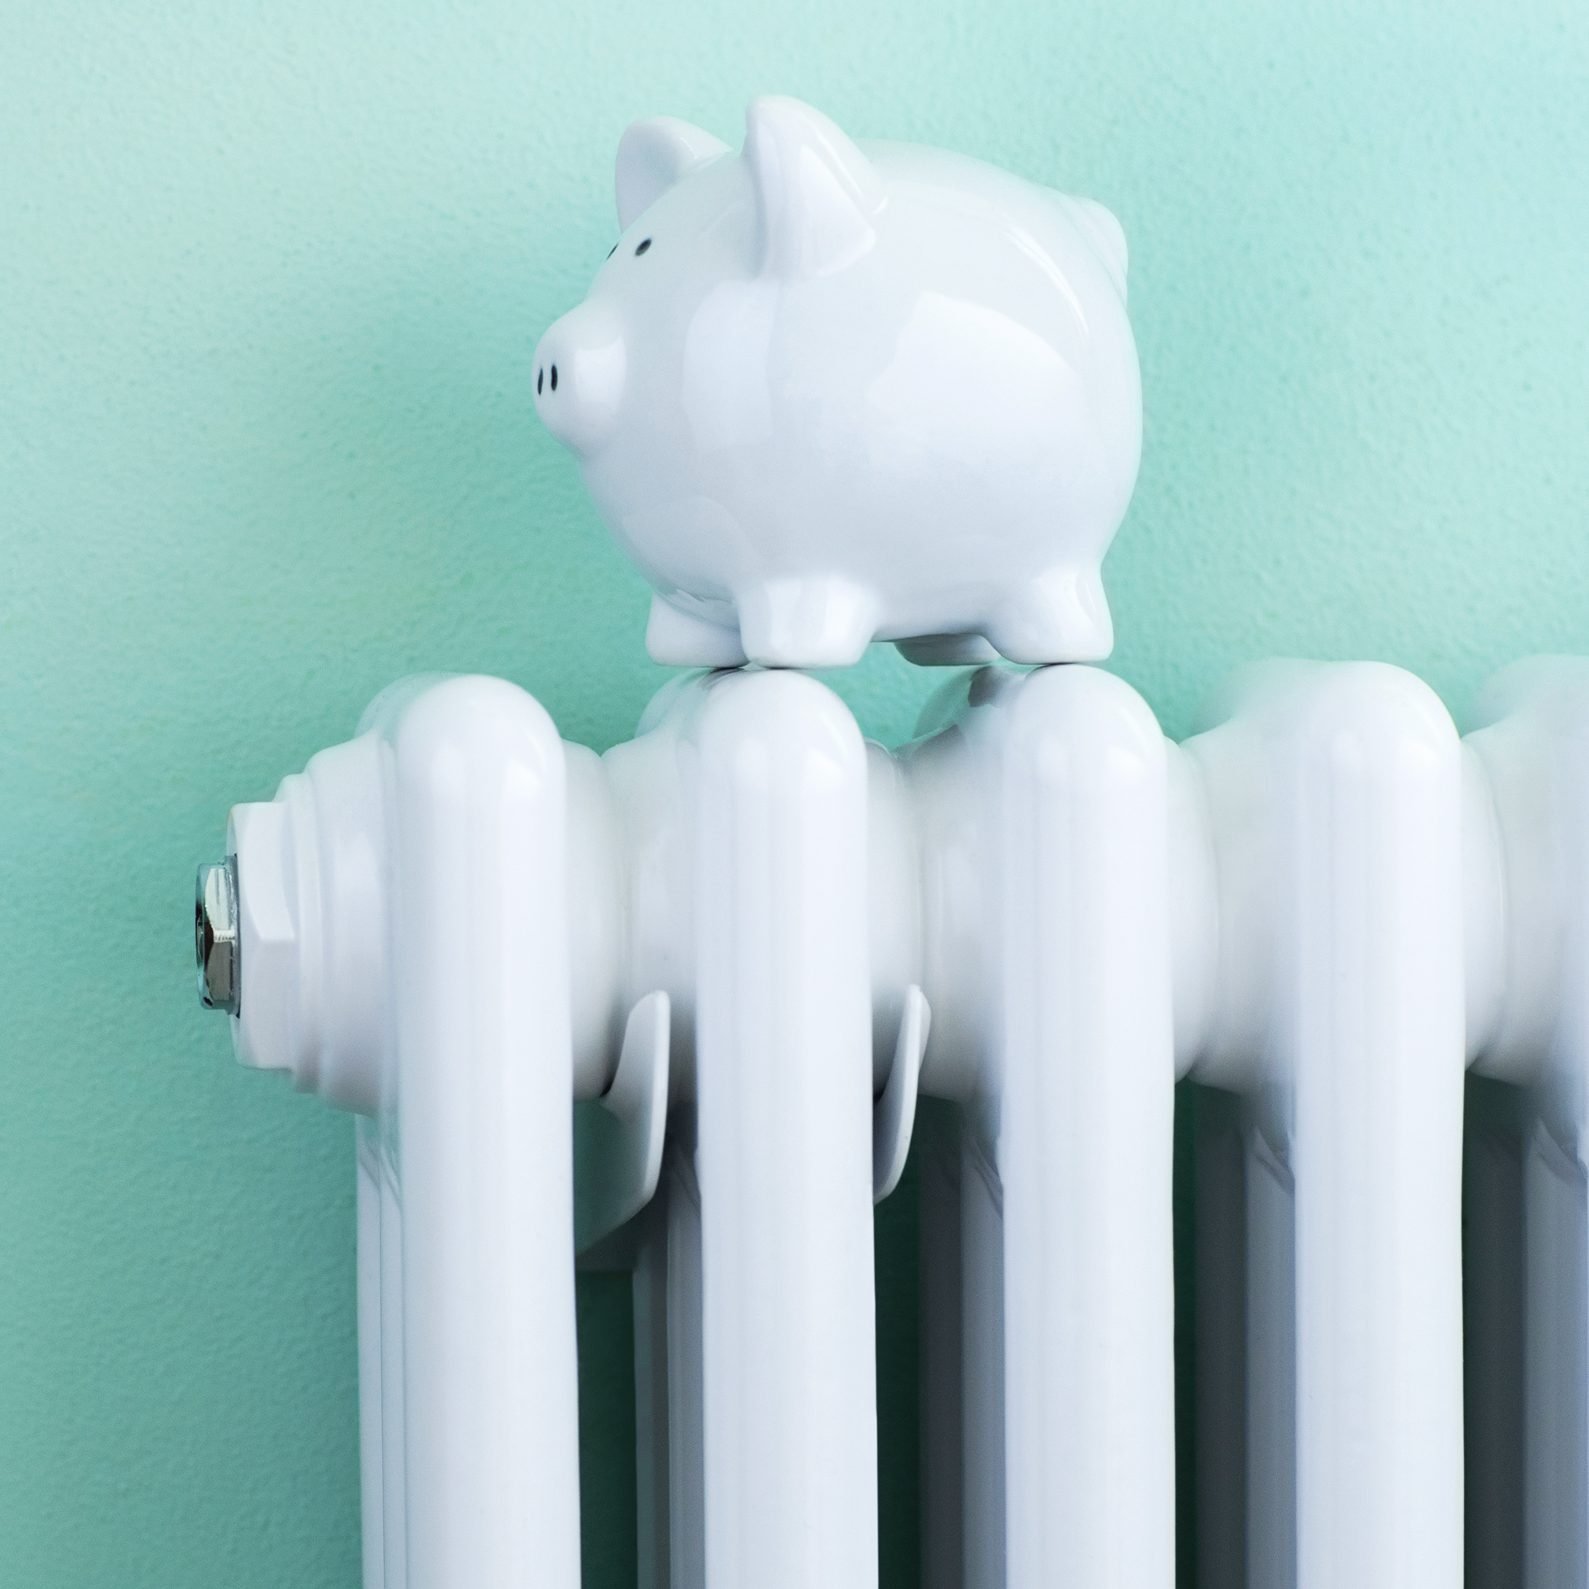 These Are the Most Cost-Effective Energy Efficiency Tips